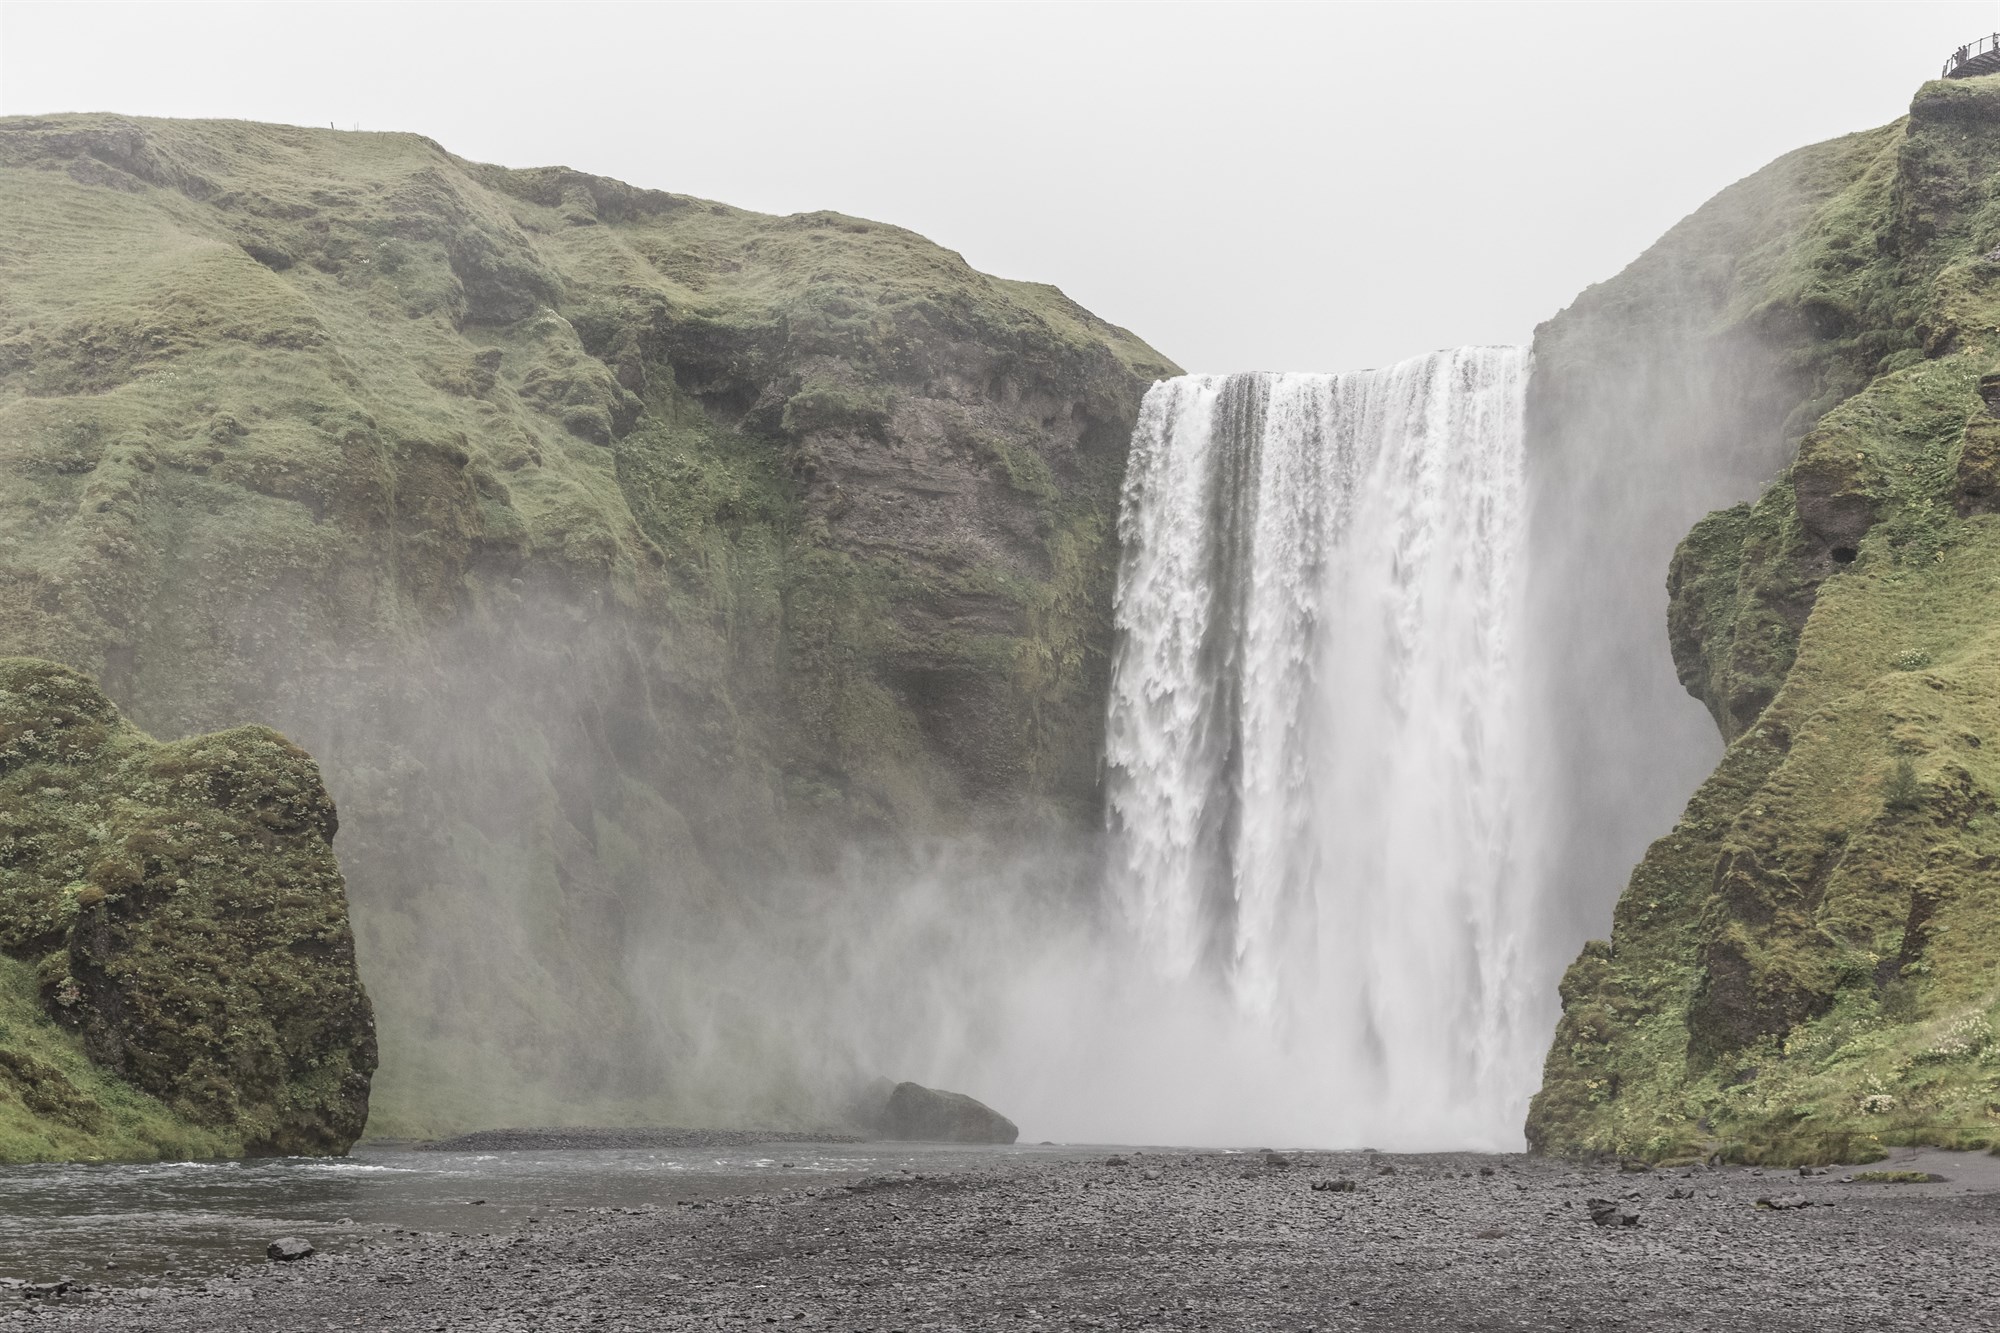 One of Iceland’s many powerful waterfalls.